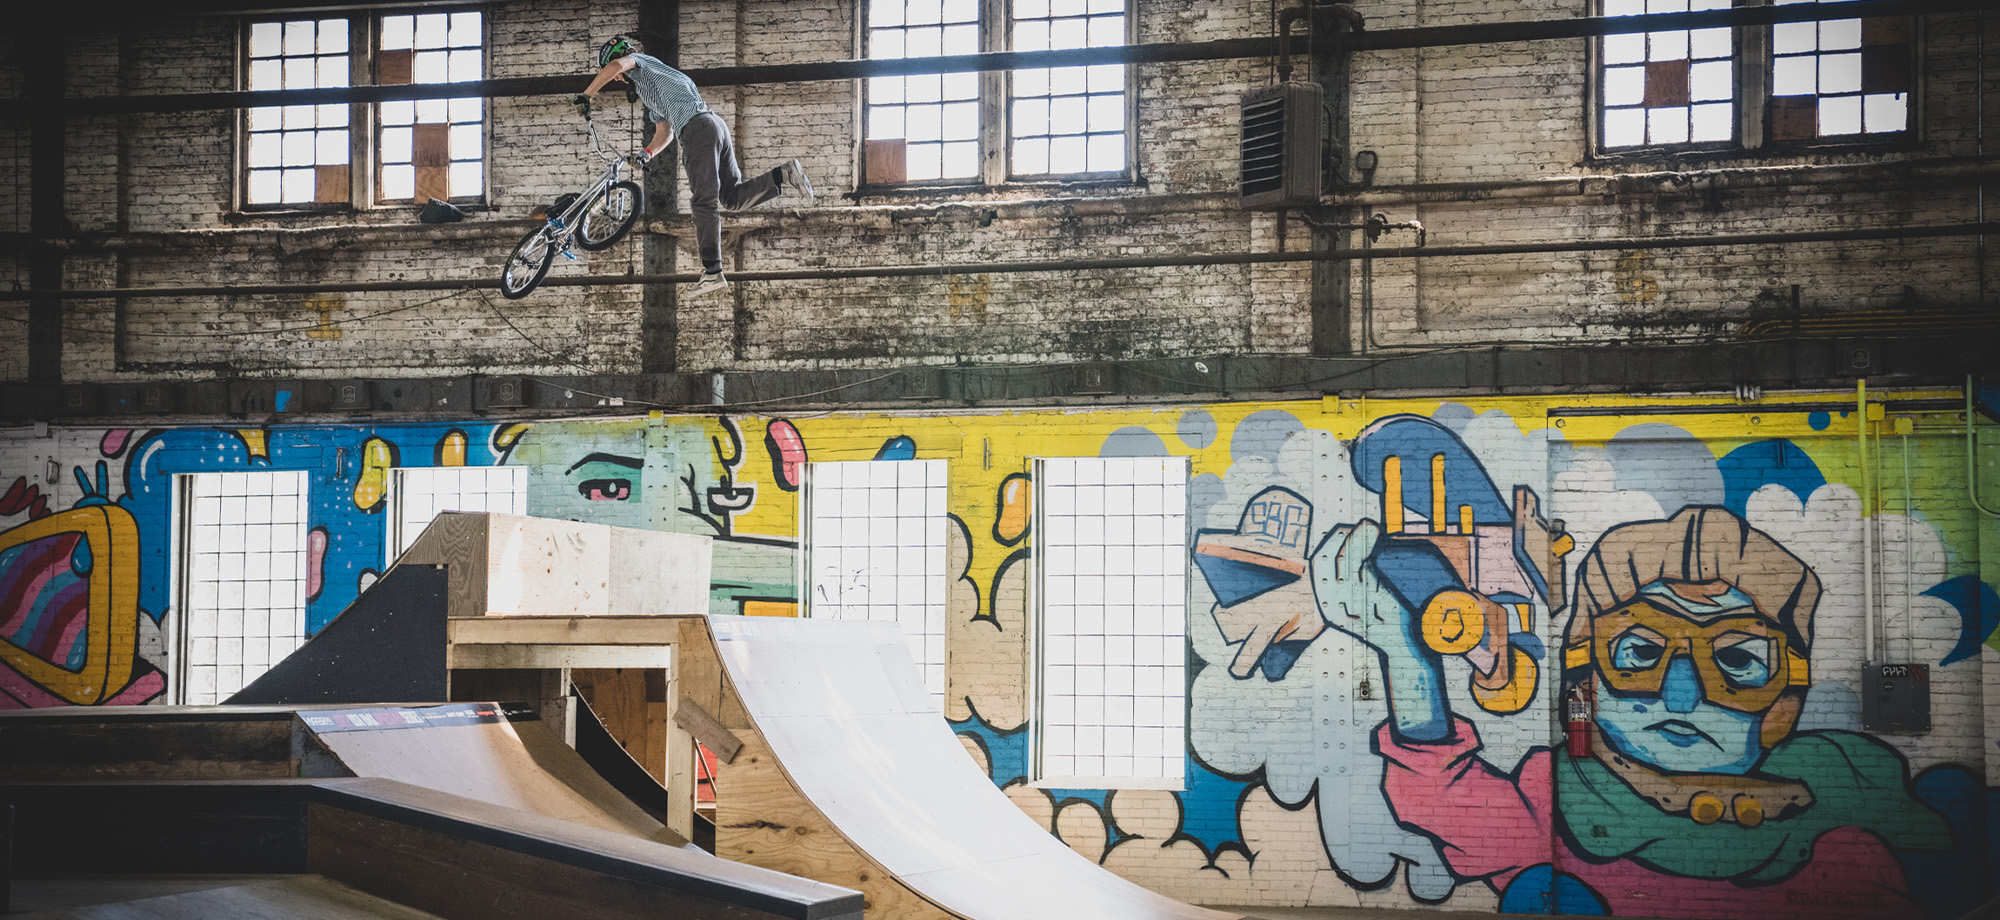 Freestyle bmx rider catching air off a ramp with graffiti wall in the background